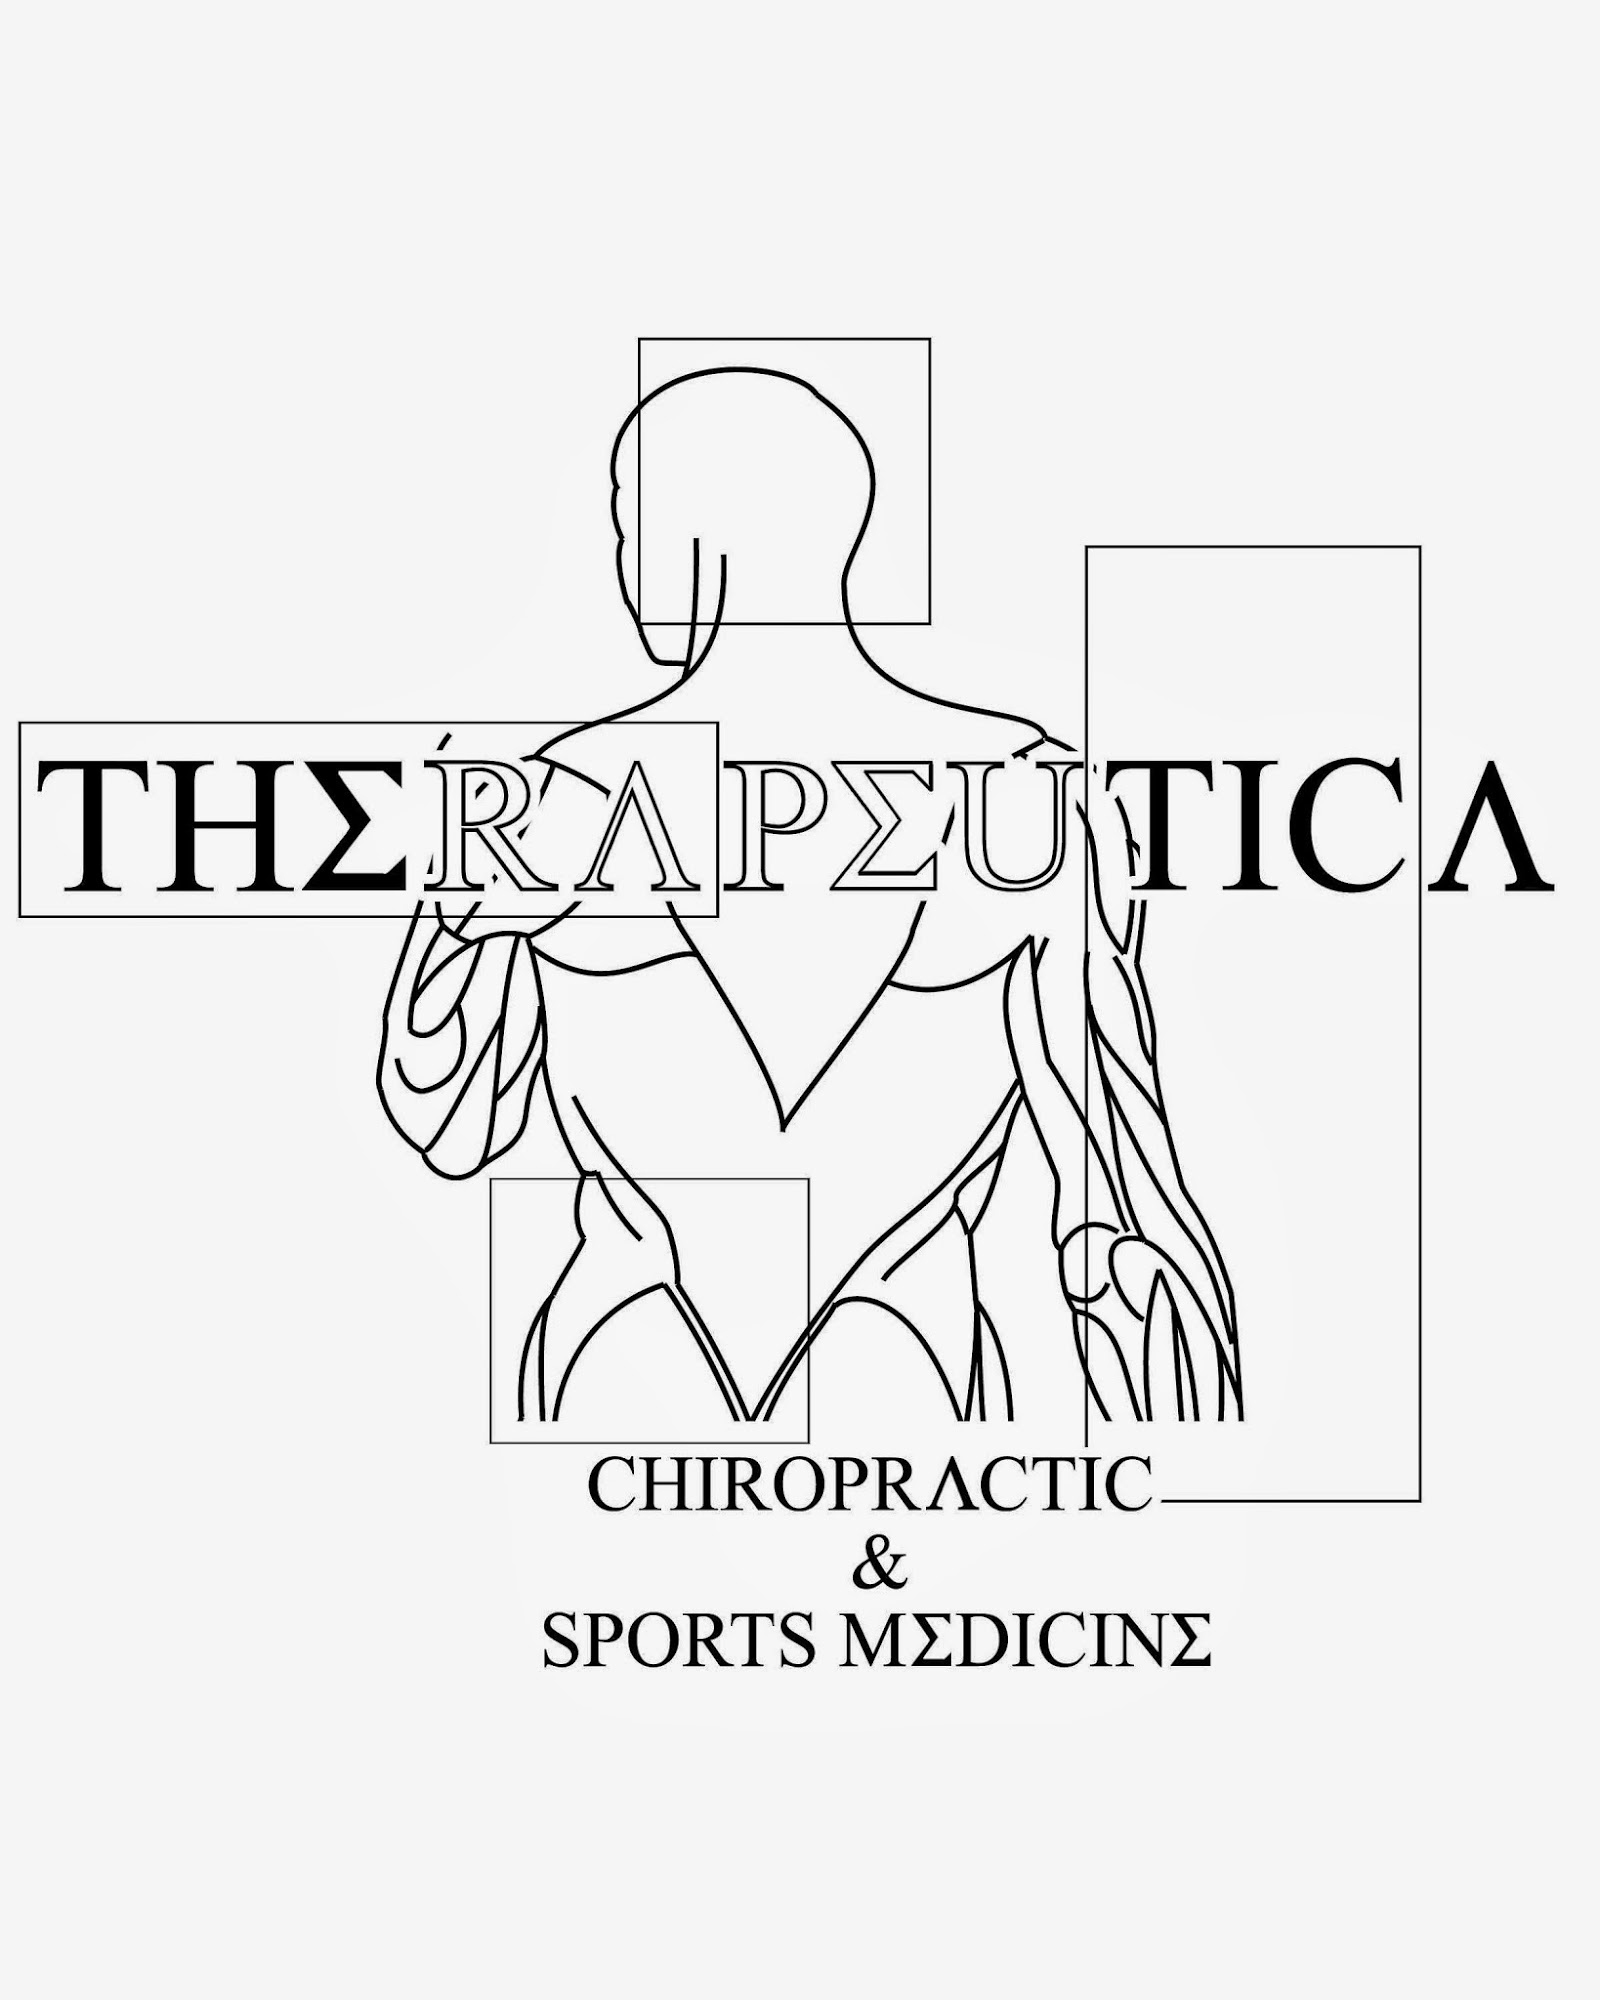 Therapeutica Chiropractic Acupuncture and Massage